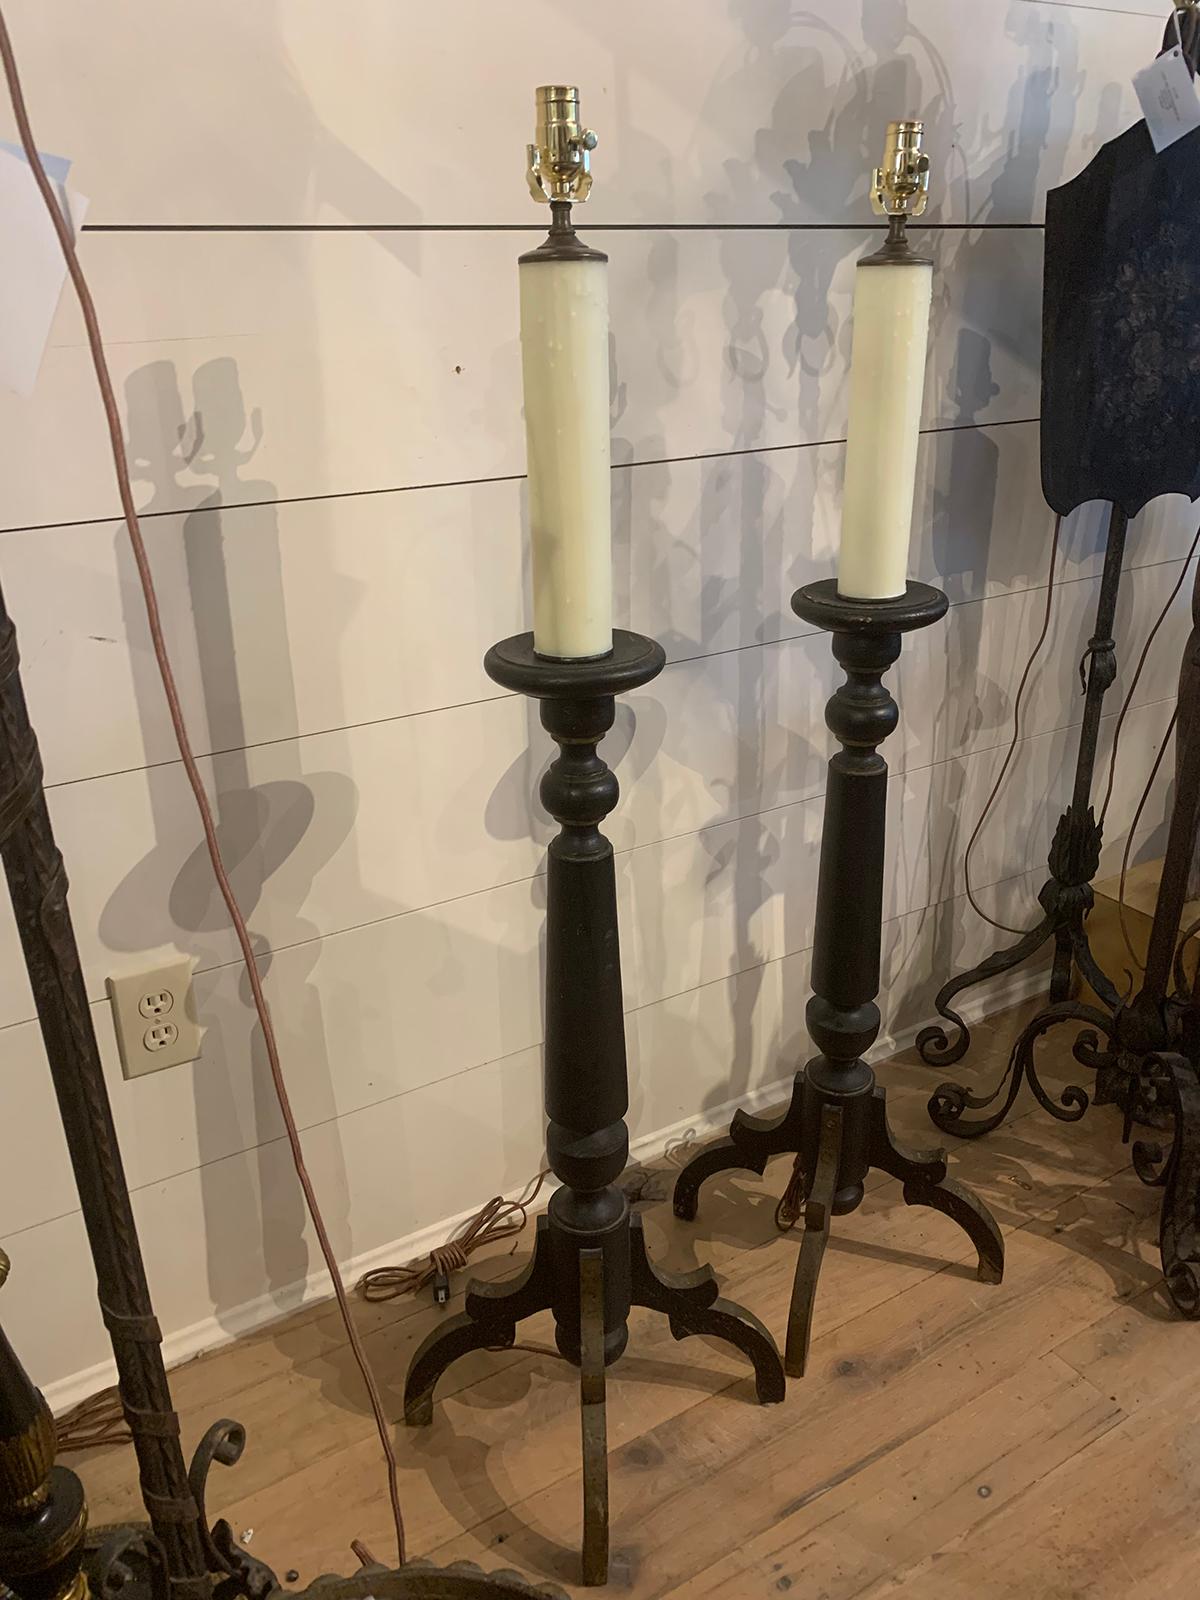 European Pair of 19th-20th Century Continental Black Painted Wood Prickets as Floor Lamps